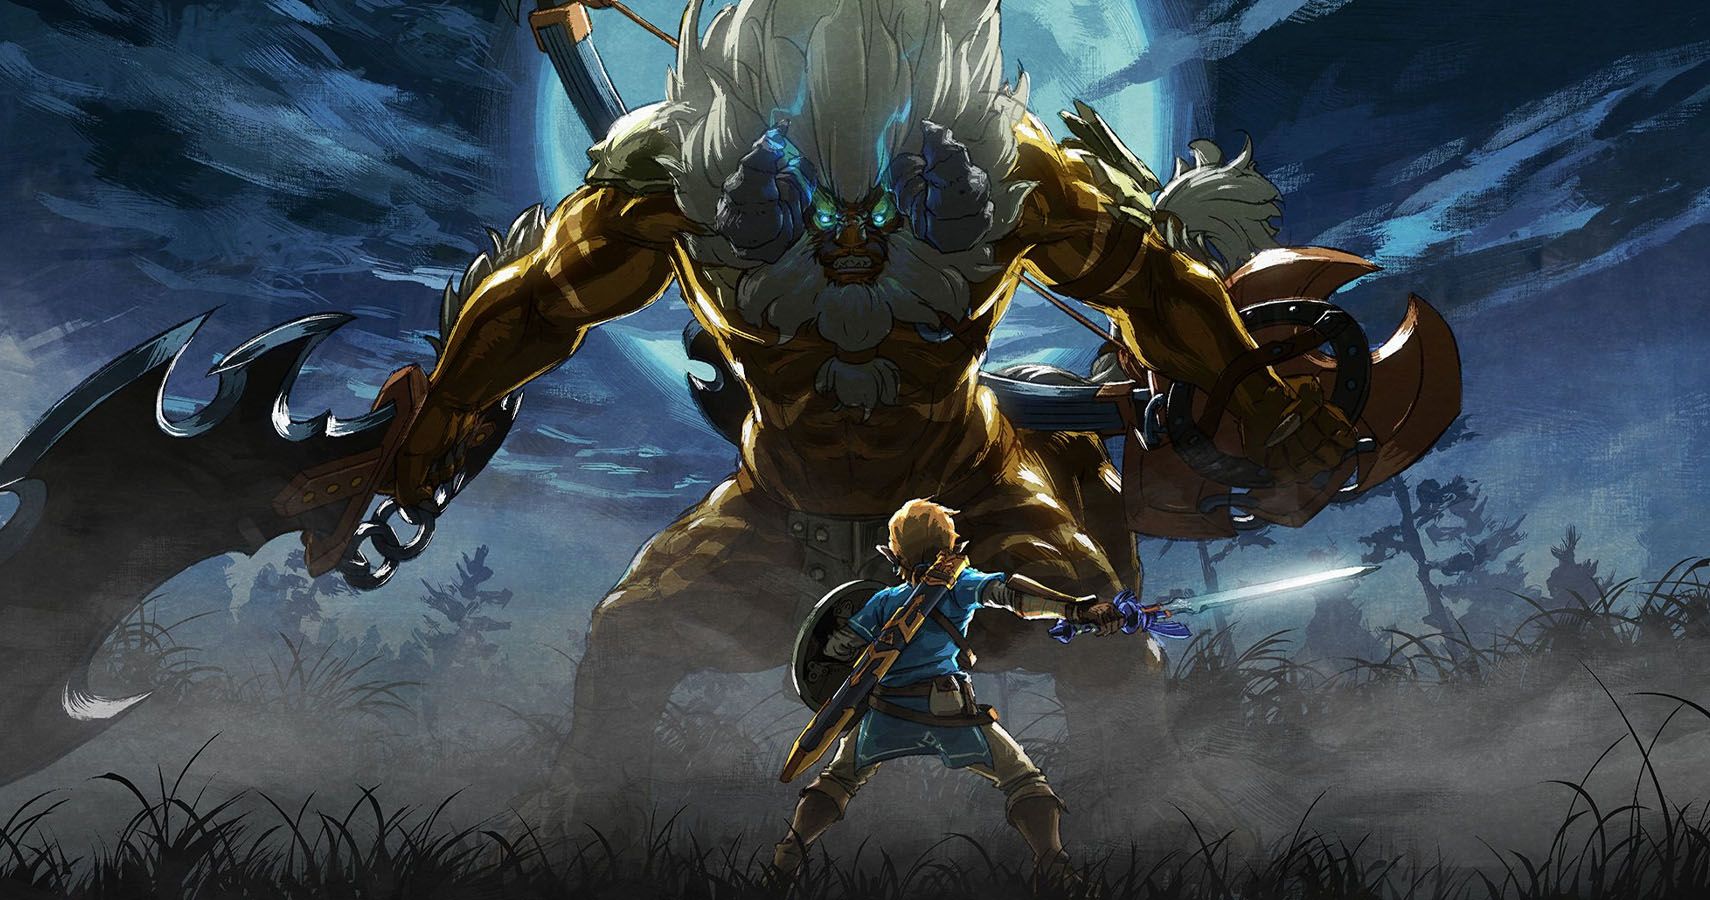 Breath of the Wild: Πώς να βρείτε και να νικήσετε ένα Lynel